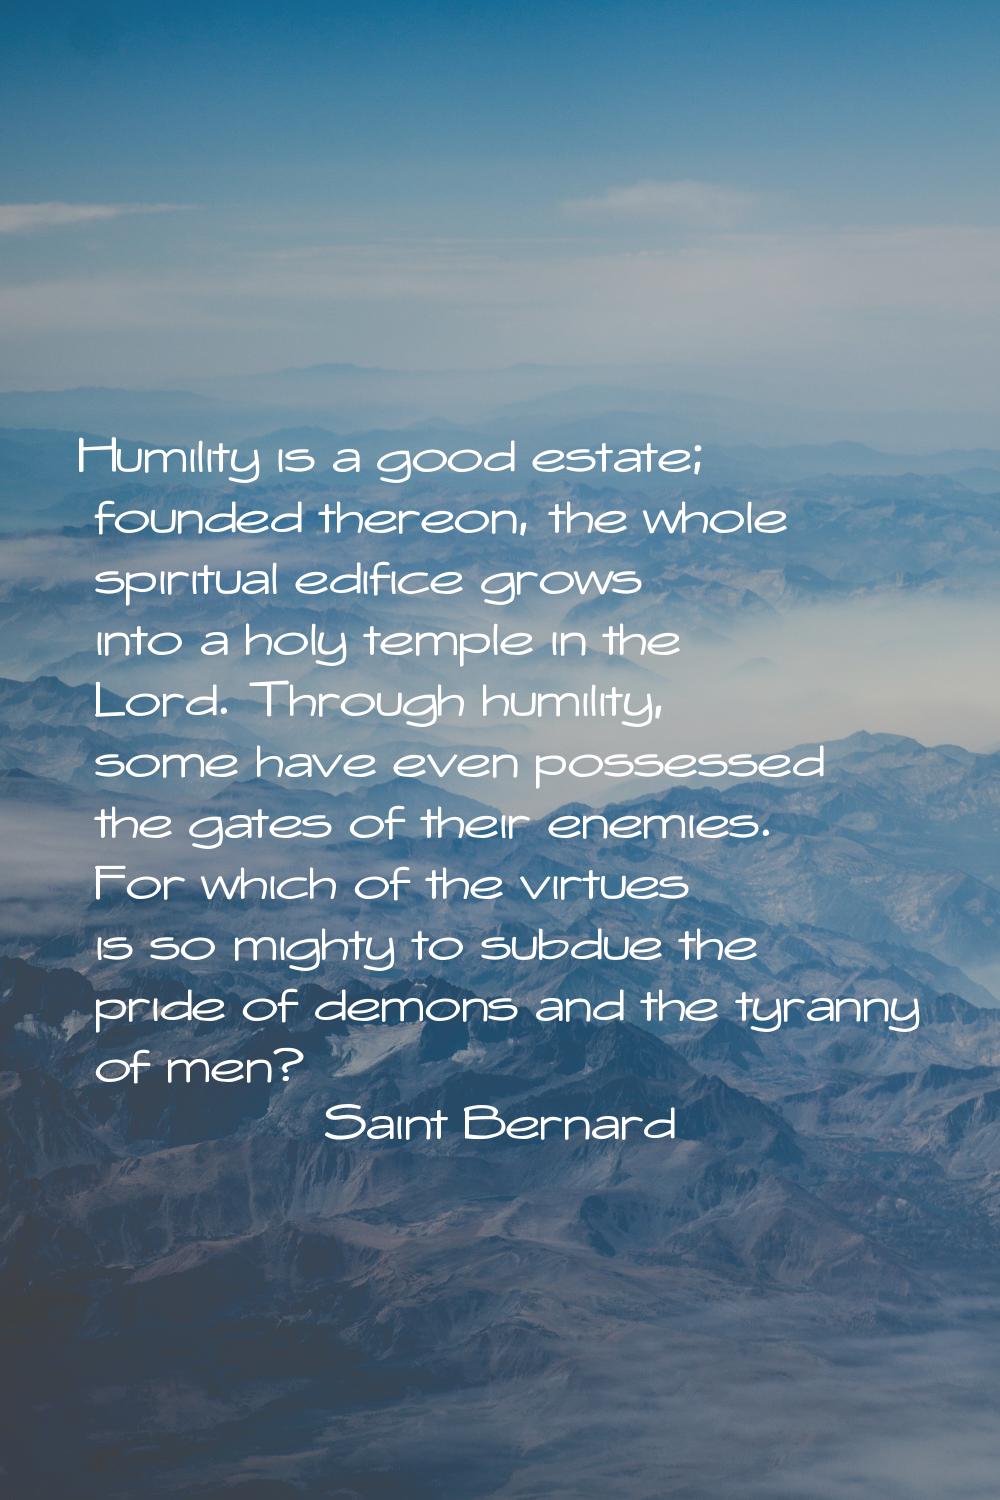 Humility is a good estate; founded thereon, the whole spiritual edifice grows into a holy temple in